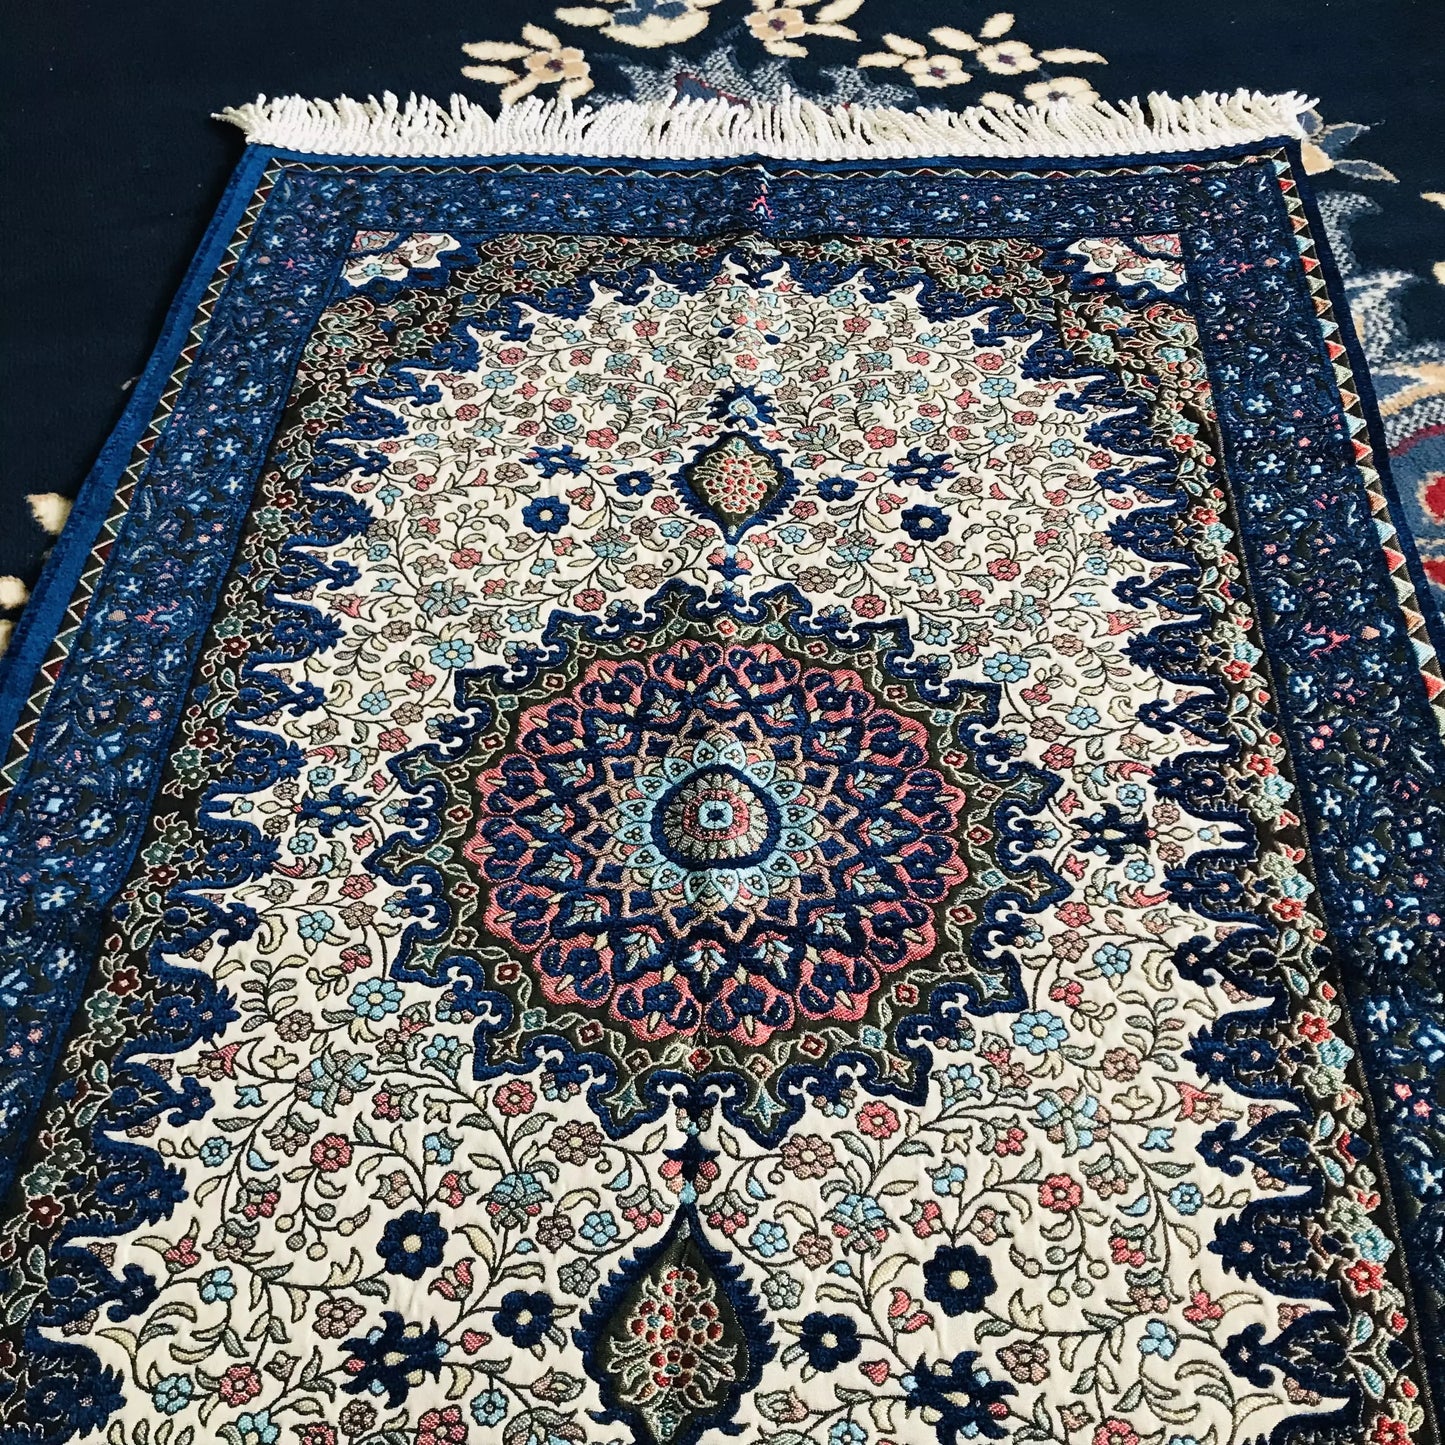 Ottoman Design, Embroidered Floral Prayer Rug  with Gift Box